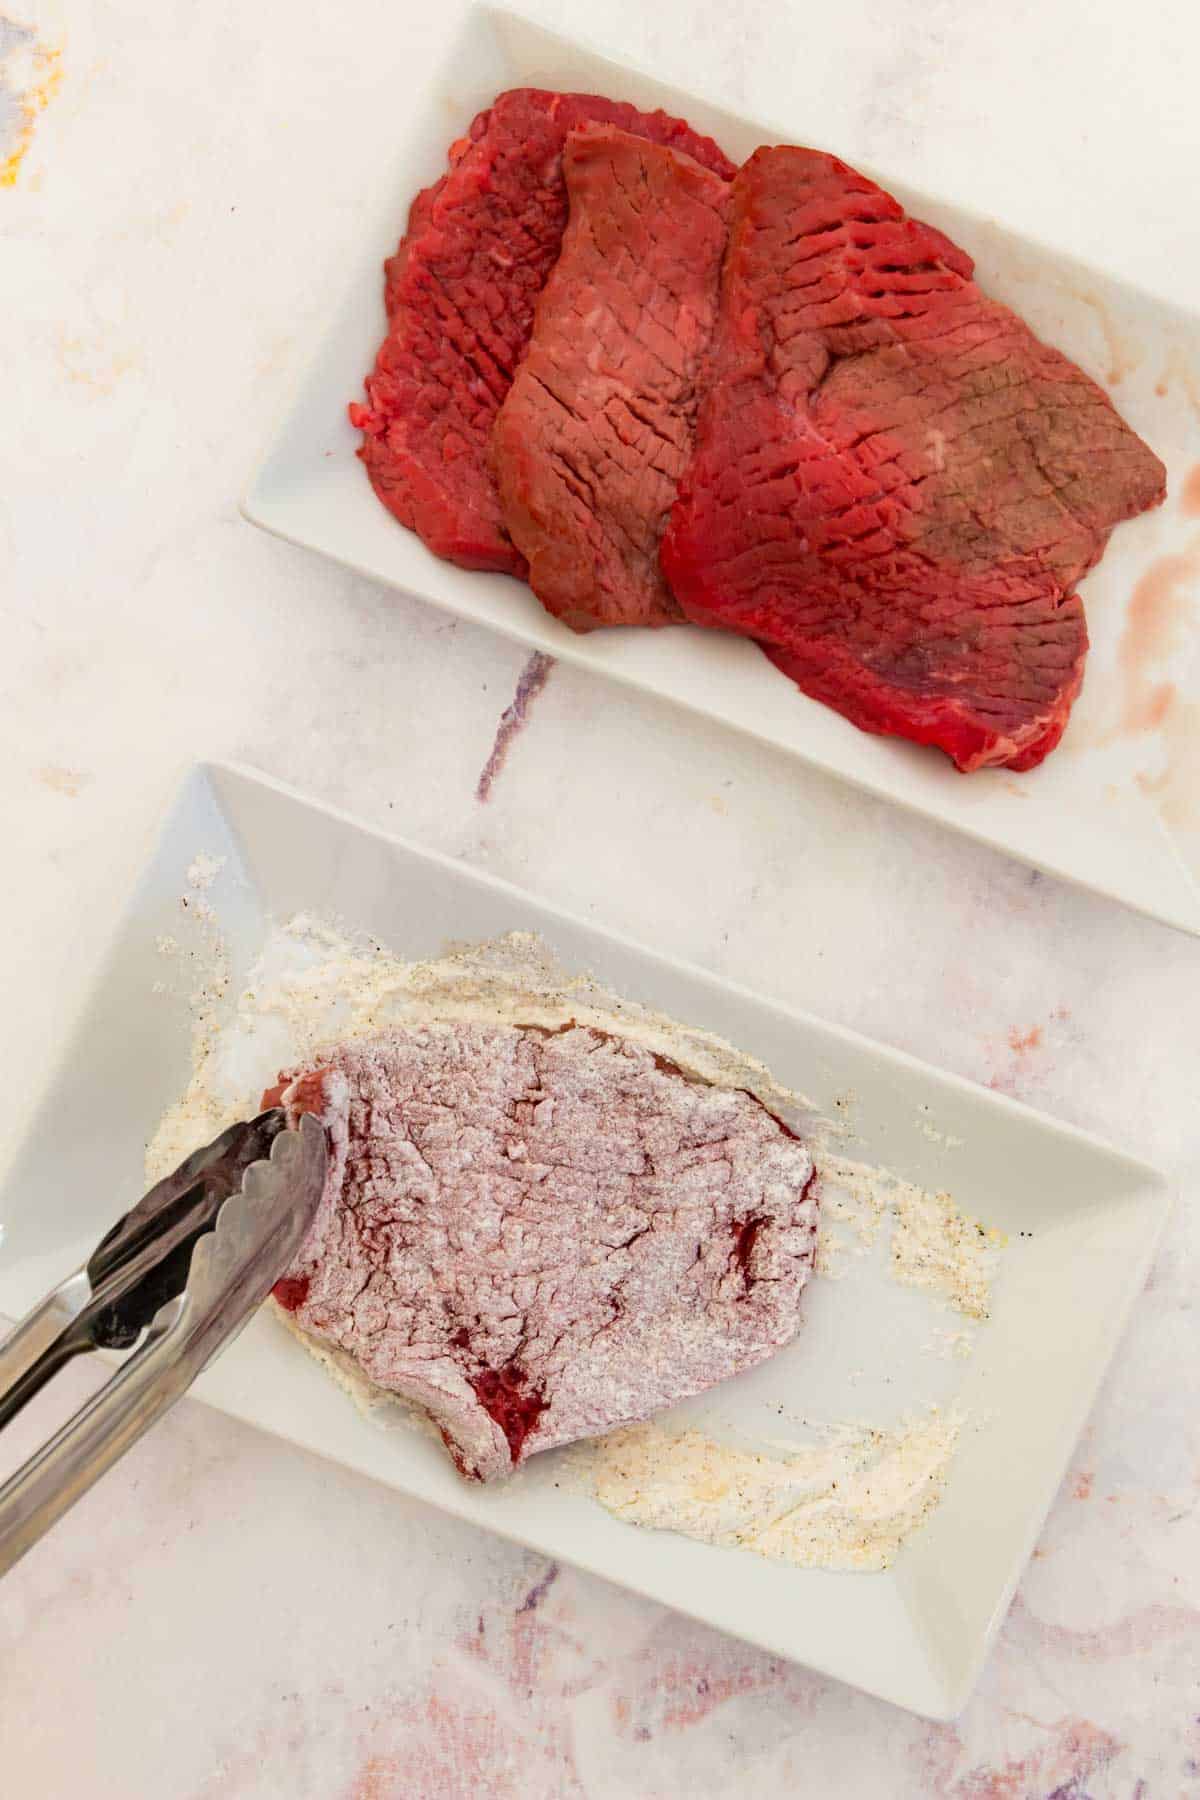 Tongs are used to dredge a piece of cube steak through a seasoned flour mixture, next to a plate of cube steaks.